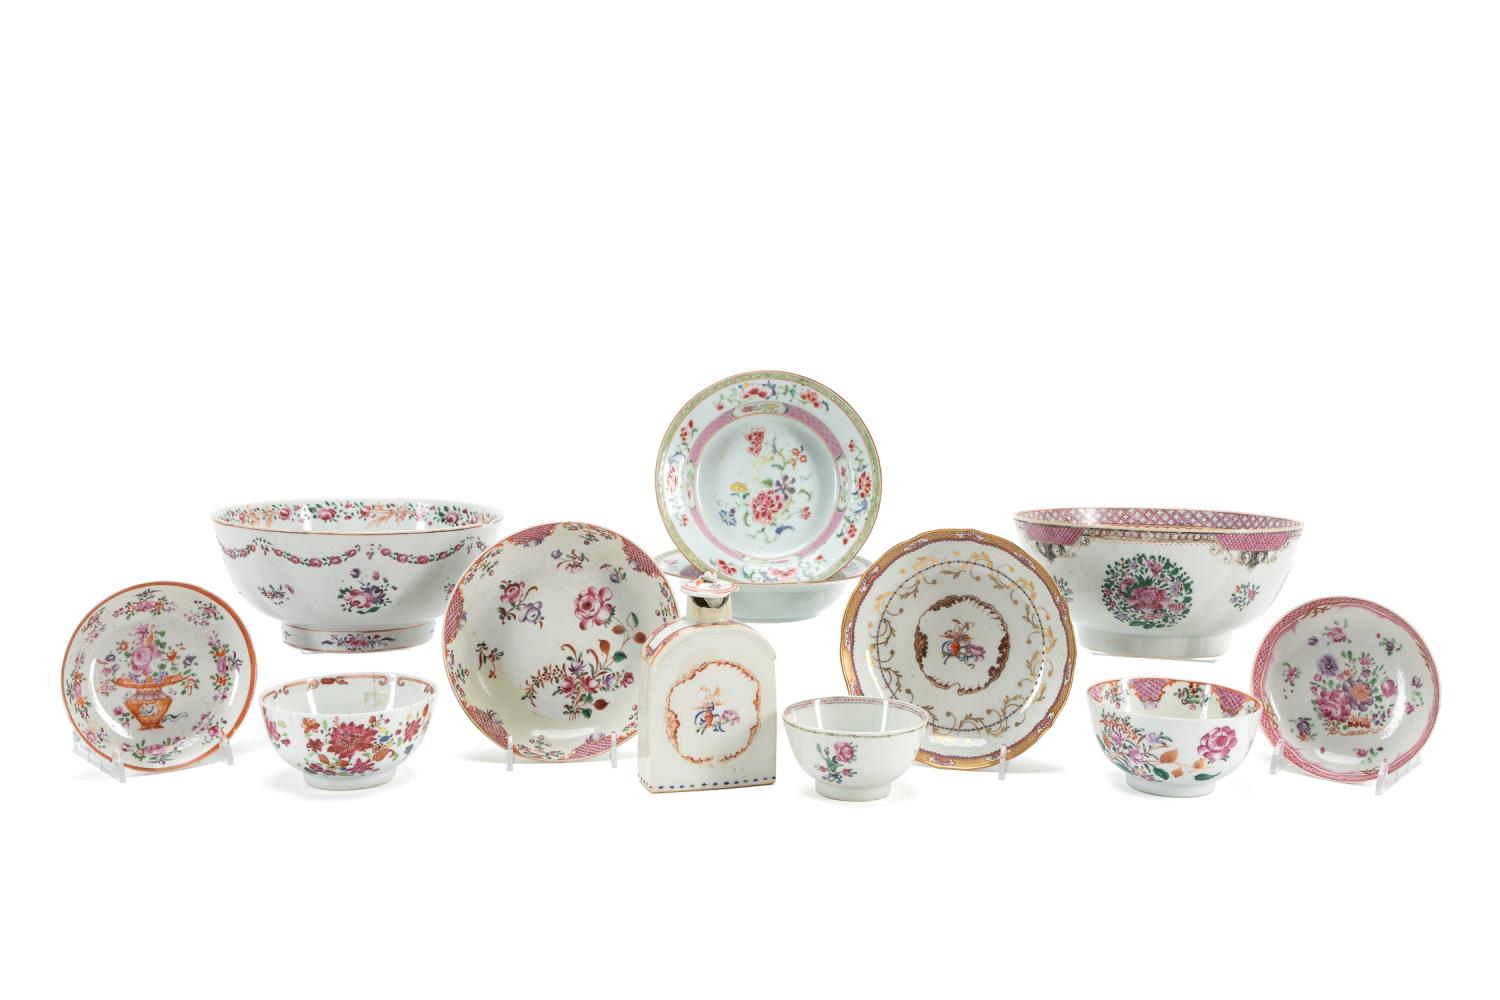 12PCS CHINESE FAMILLE ROSE EXPORT